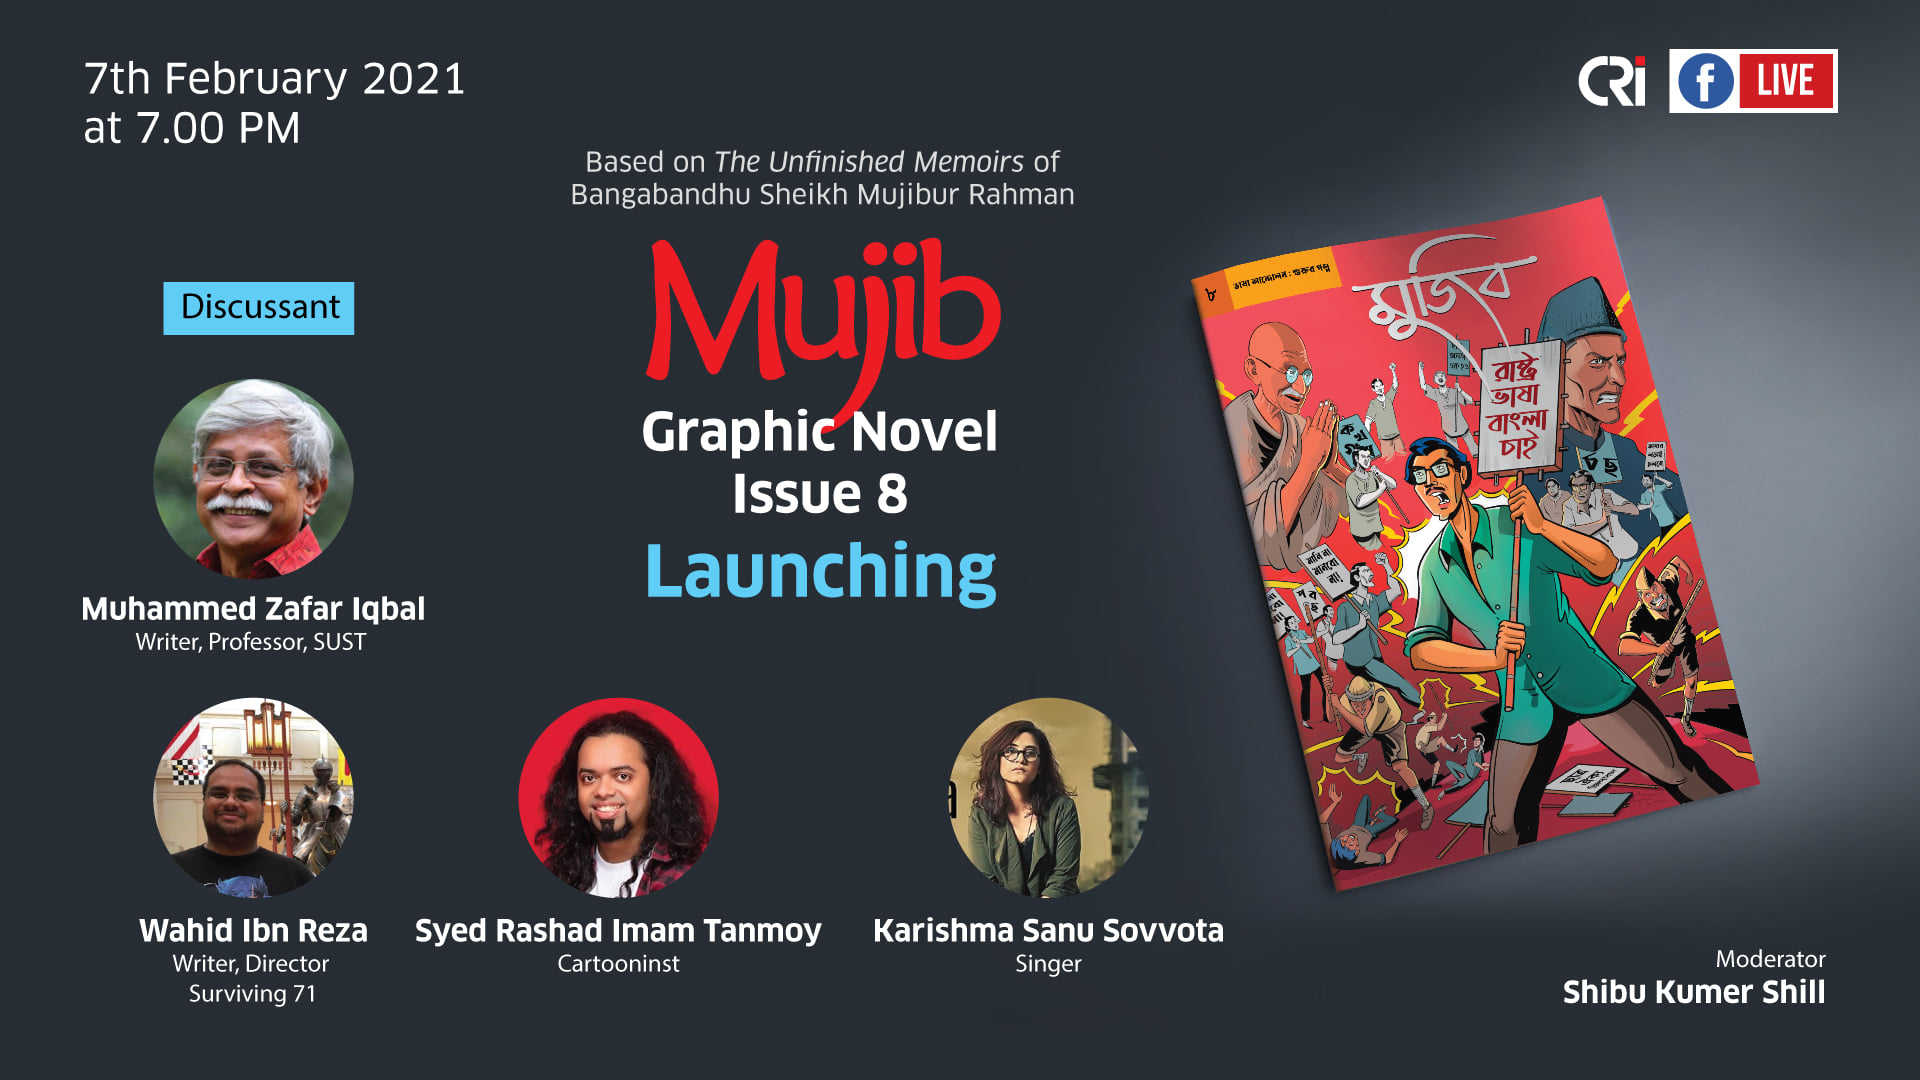 8th episode of graphic novel series ‘Mujib’ to be launched on 7th February, 2021